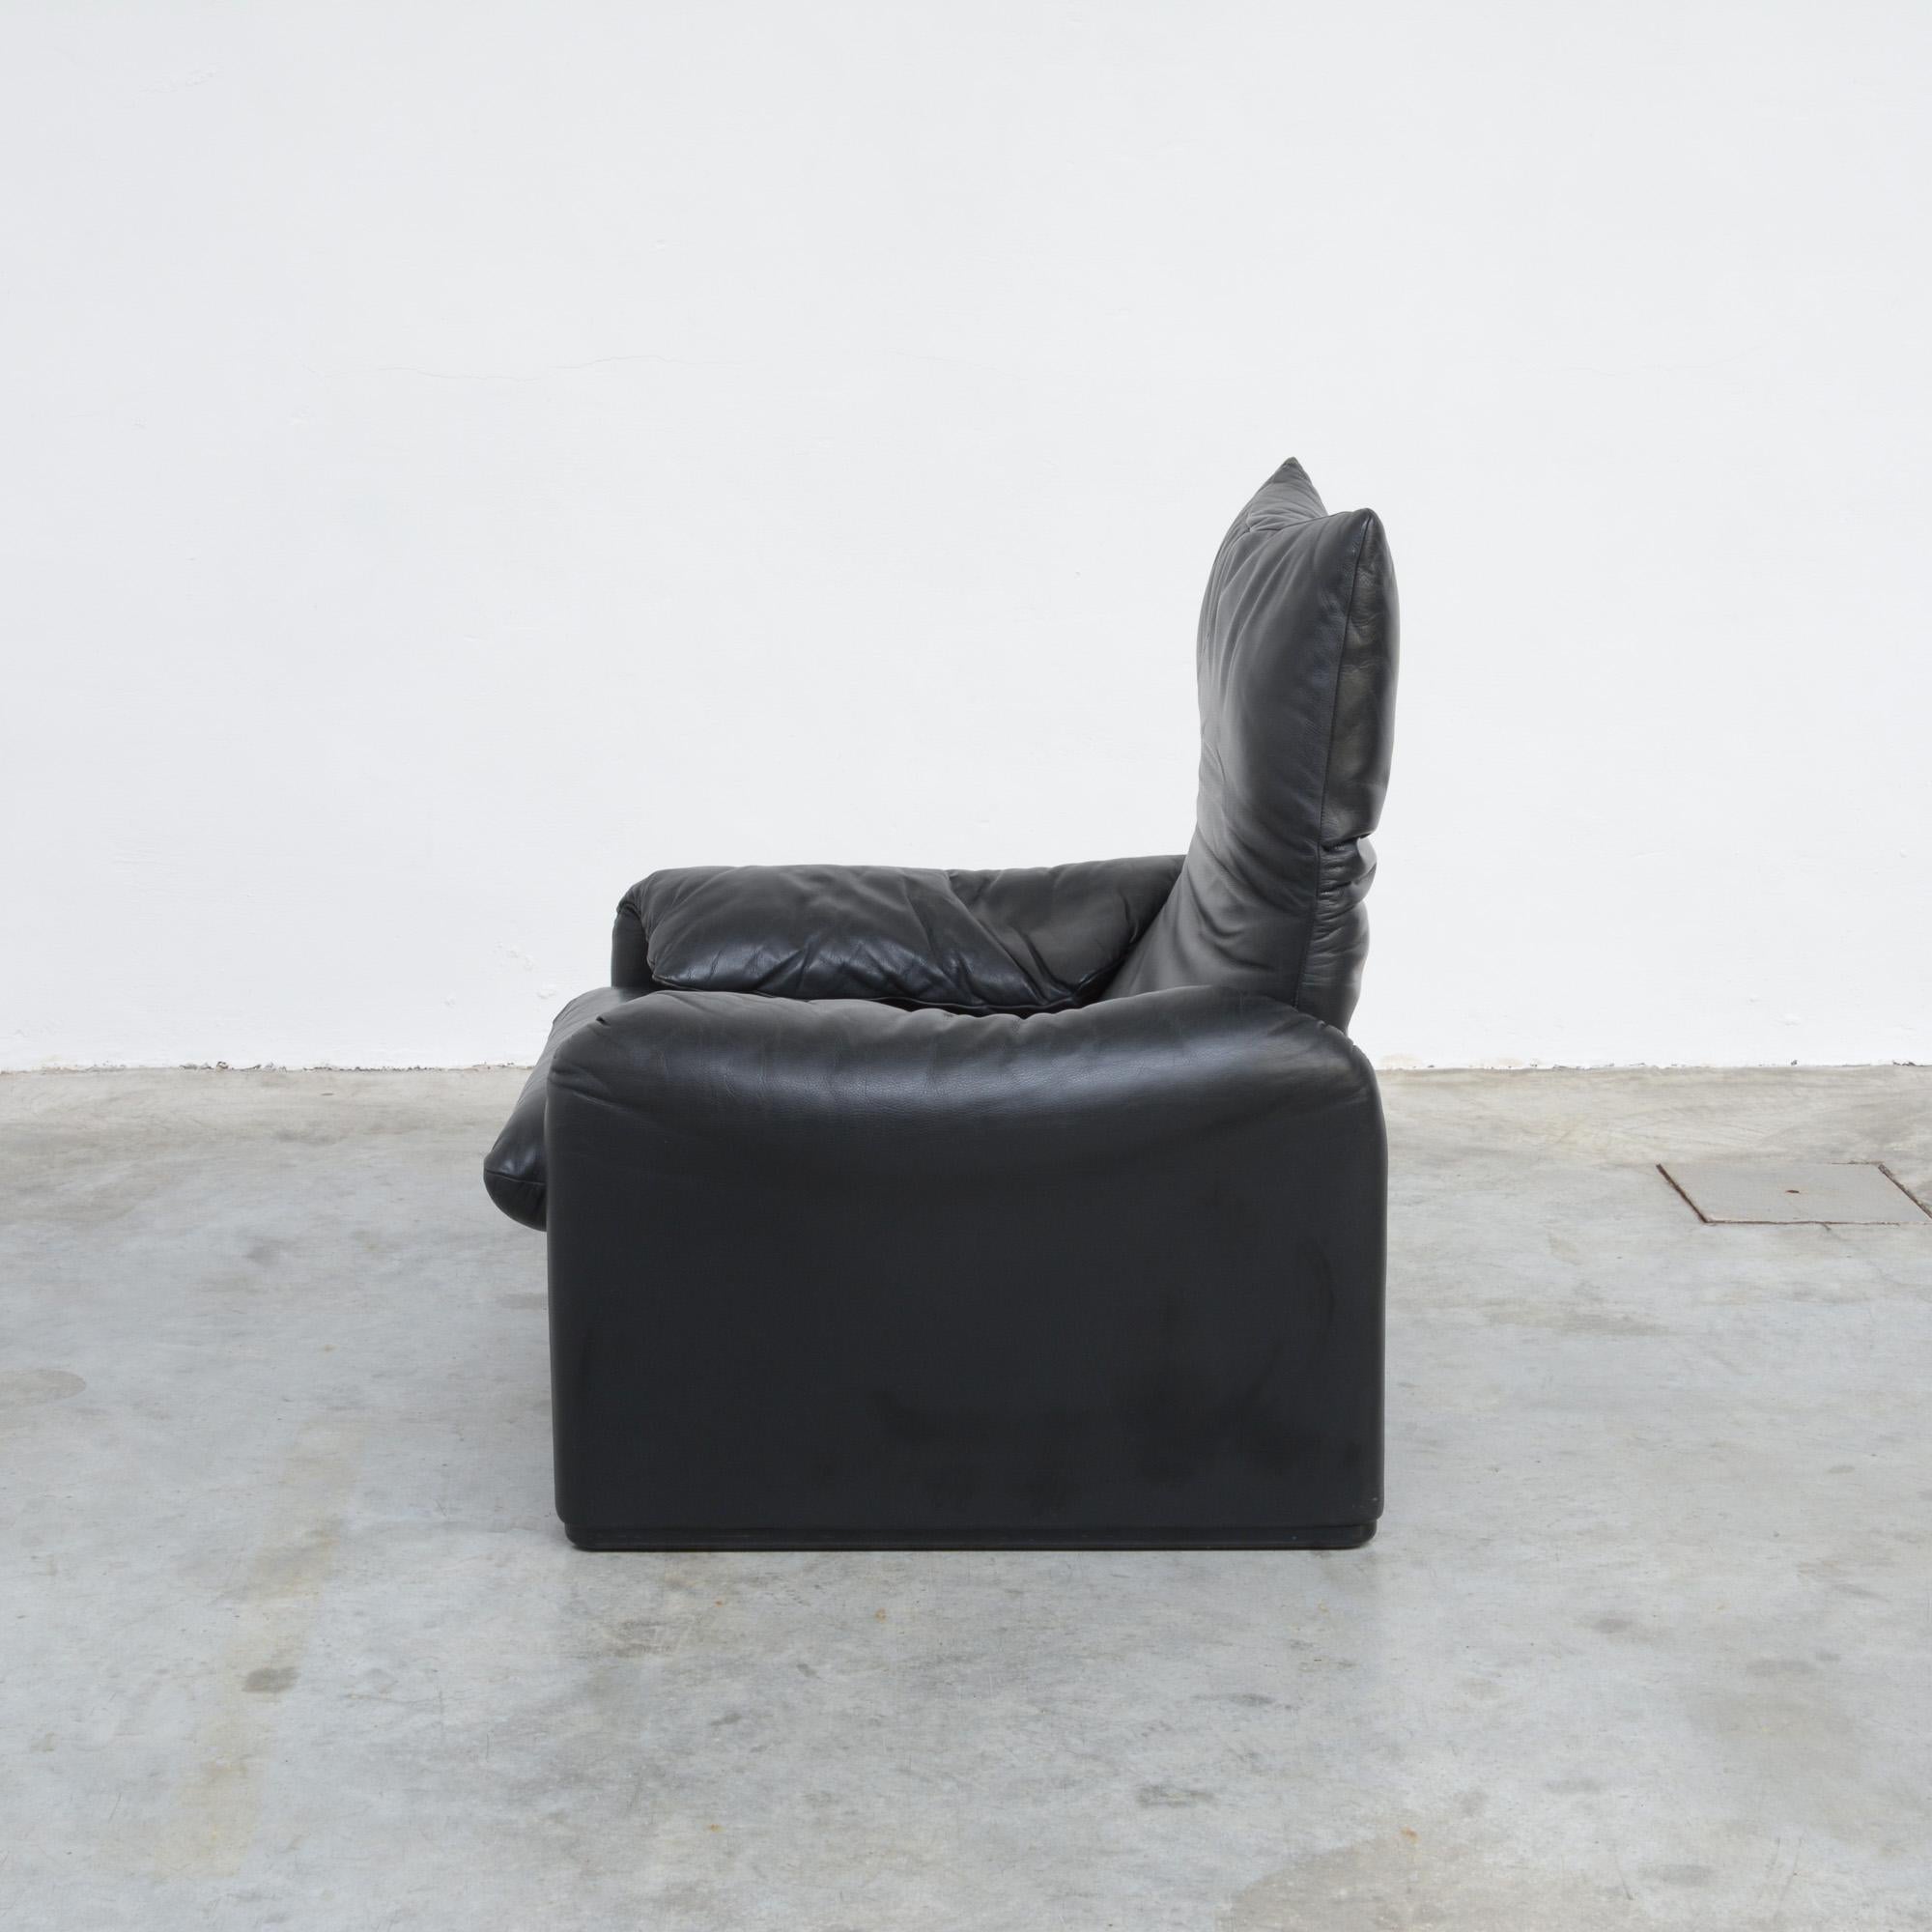 Late 20th Century Black Leather Maralunga Easy Chair